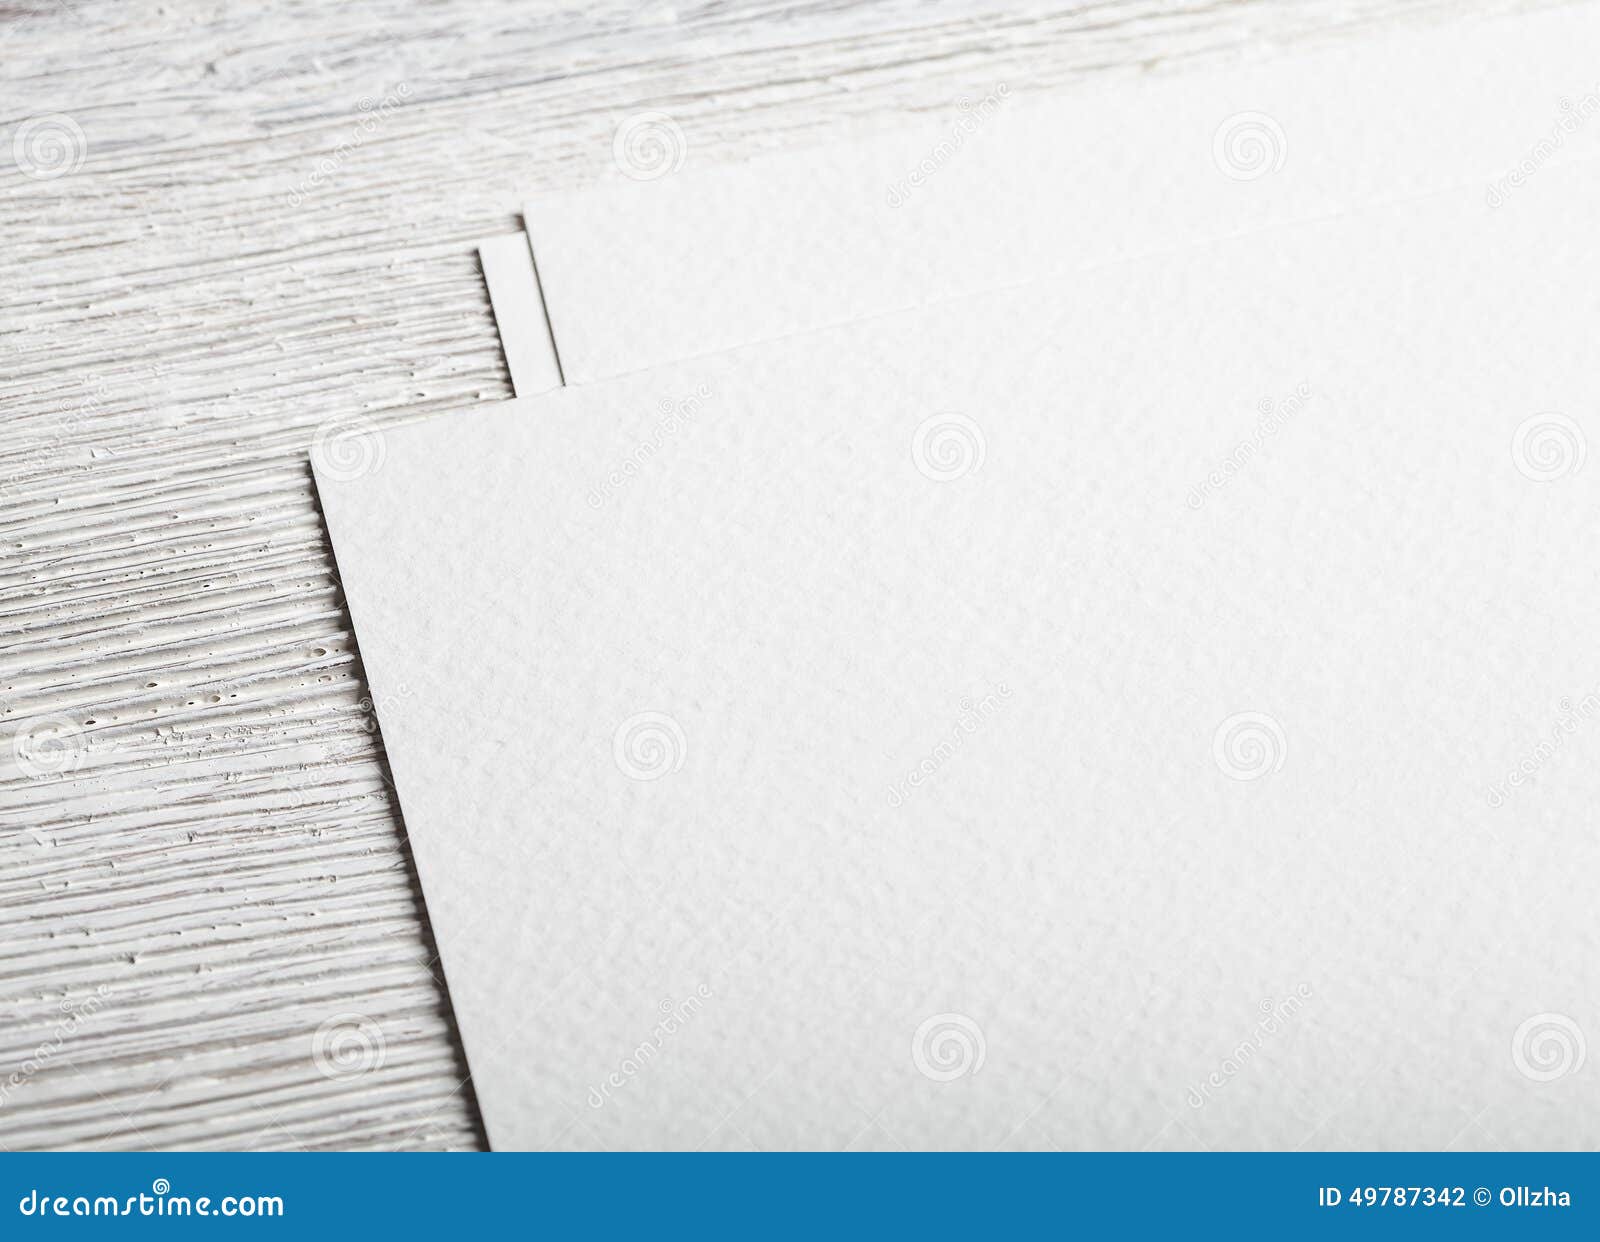 Download White Blank Paper Page Closeup Mockup Stock Photo Image Of Paper Table 49787342 PSD Mockup Templates